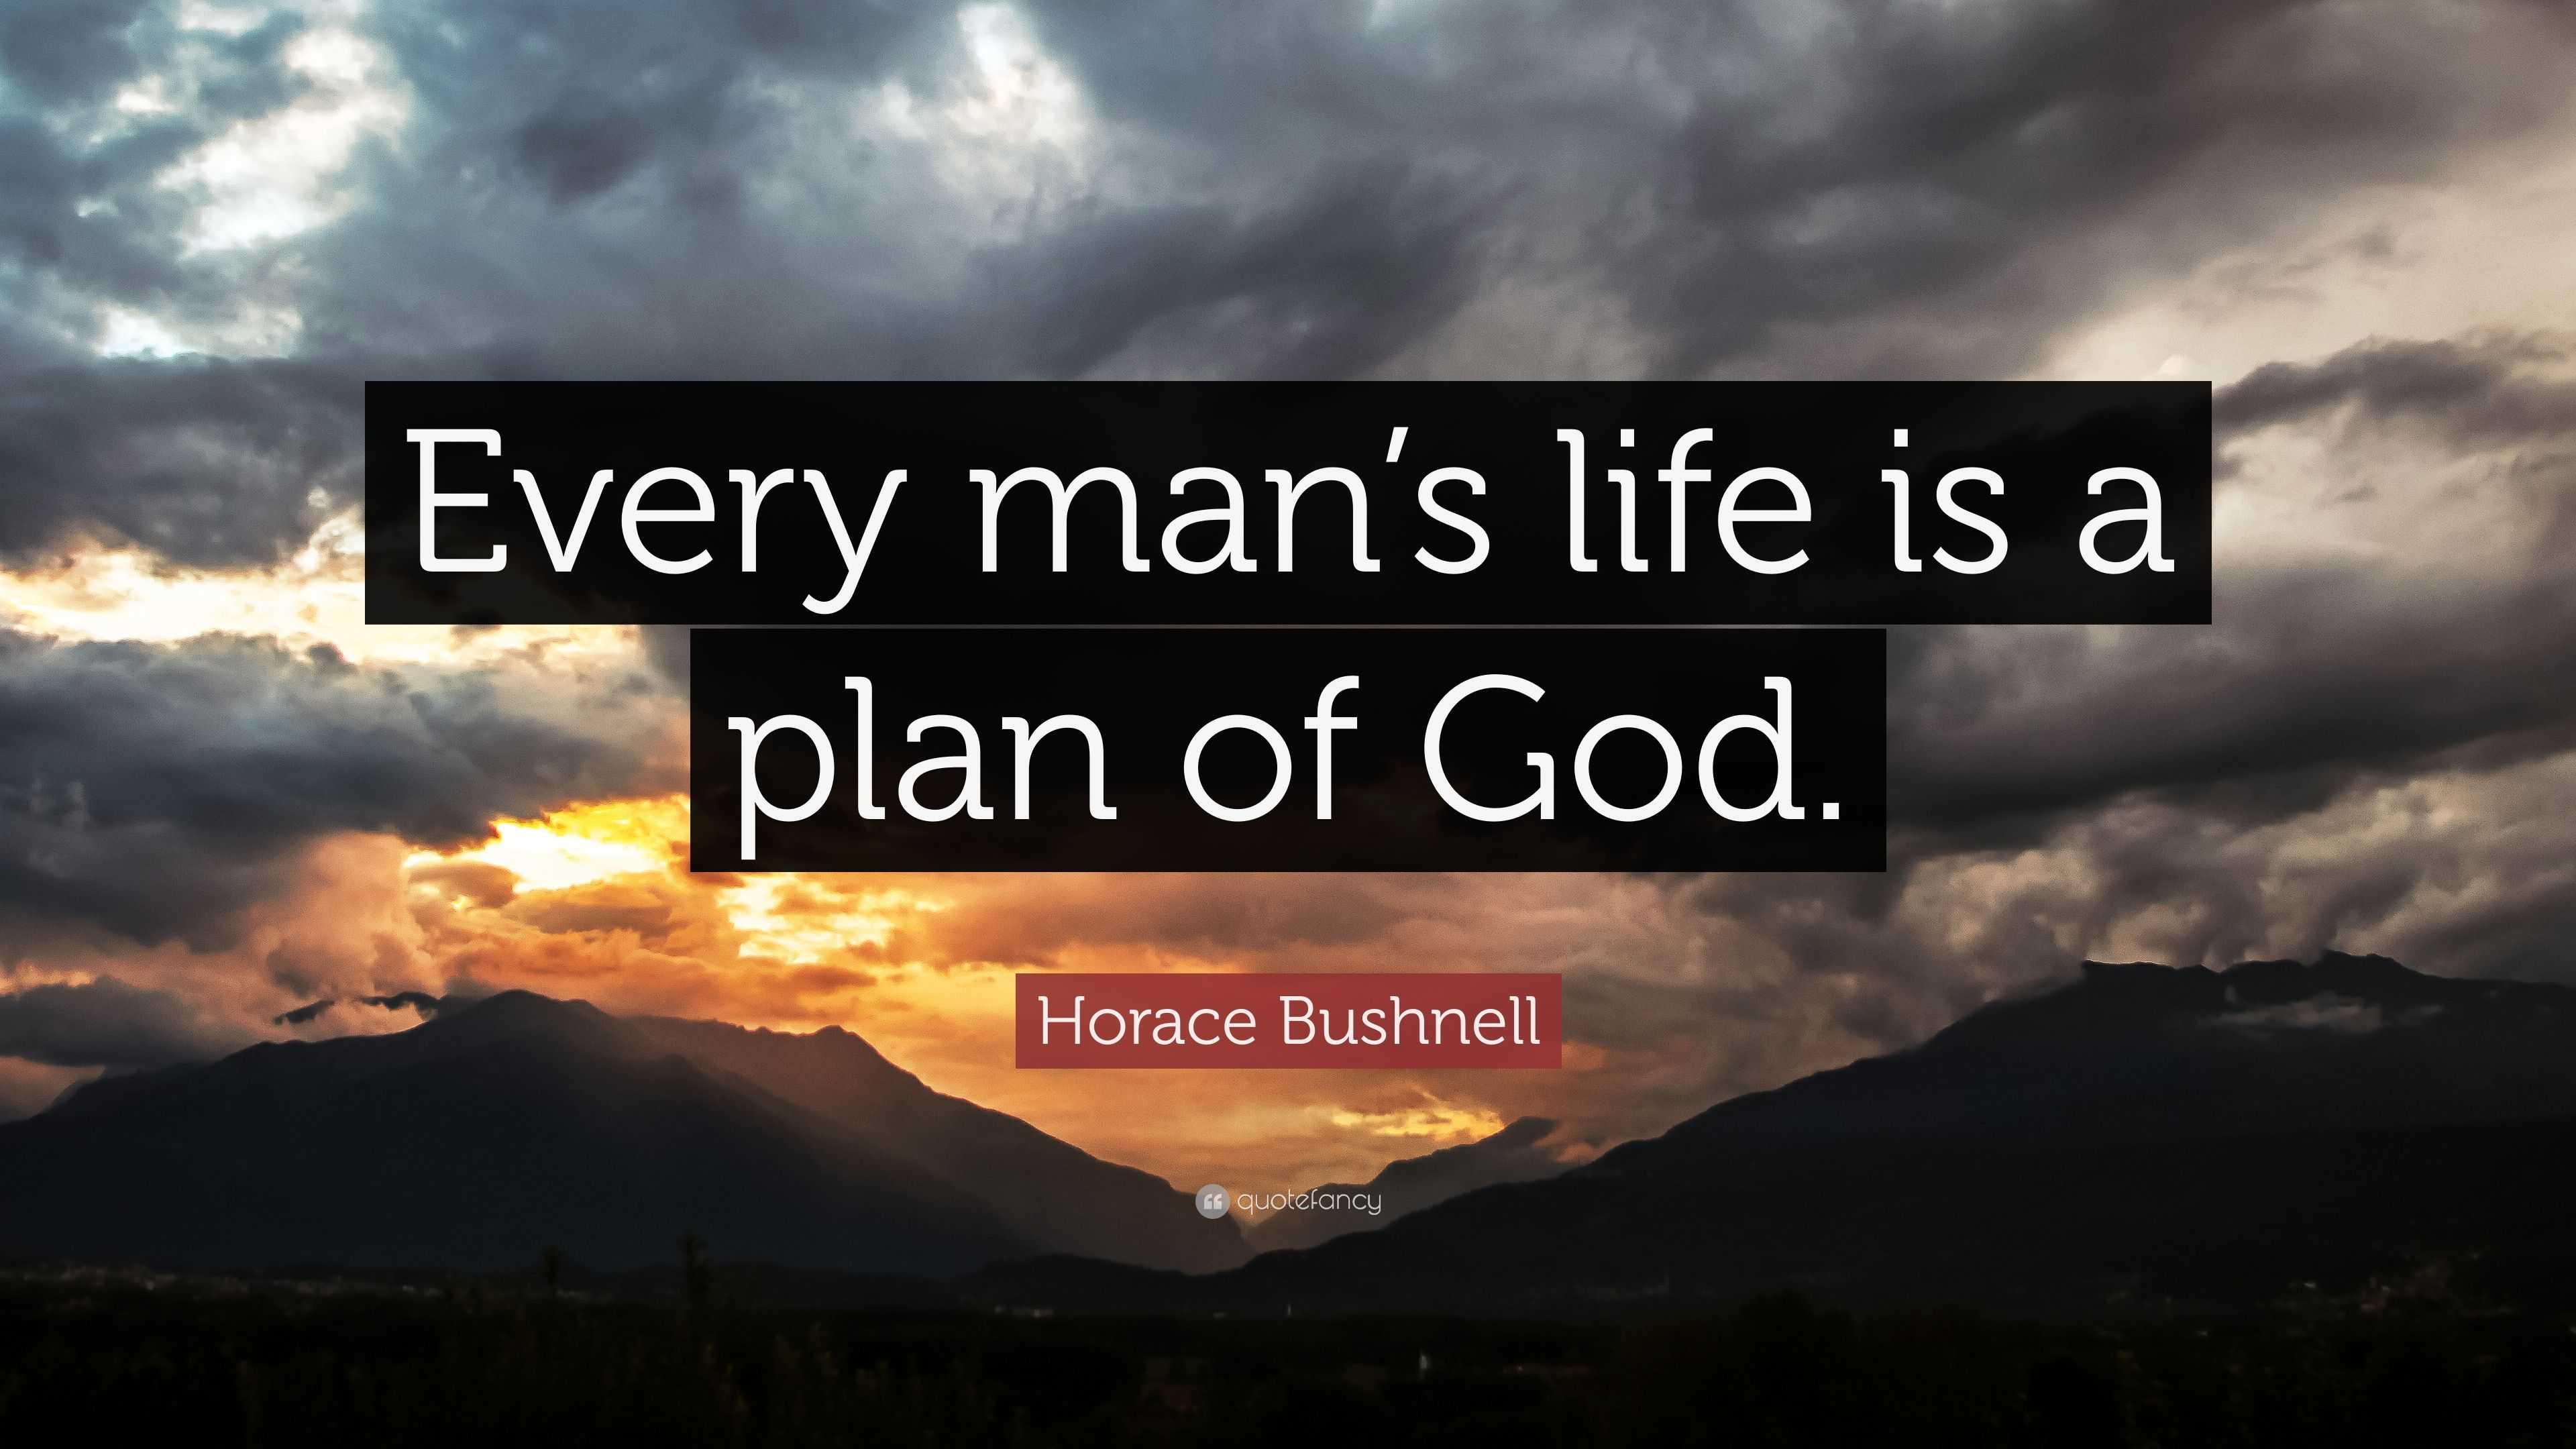 2791972 Horace Bushnell Quote Every man s life is a plan of God